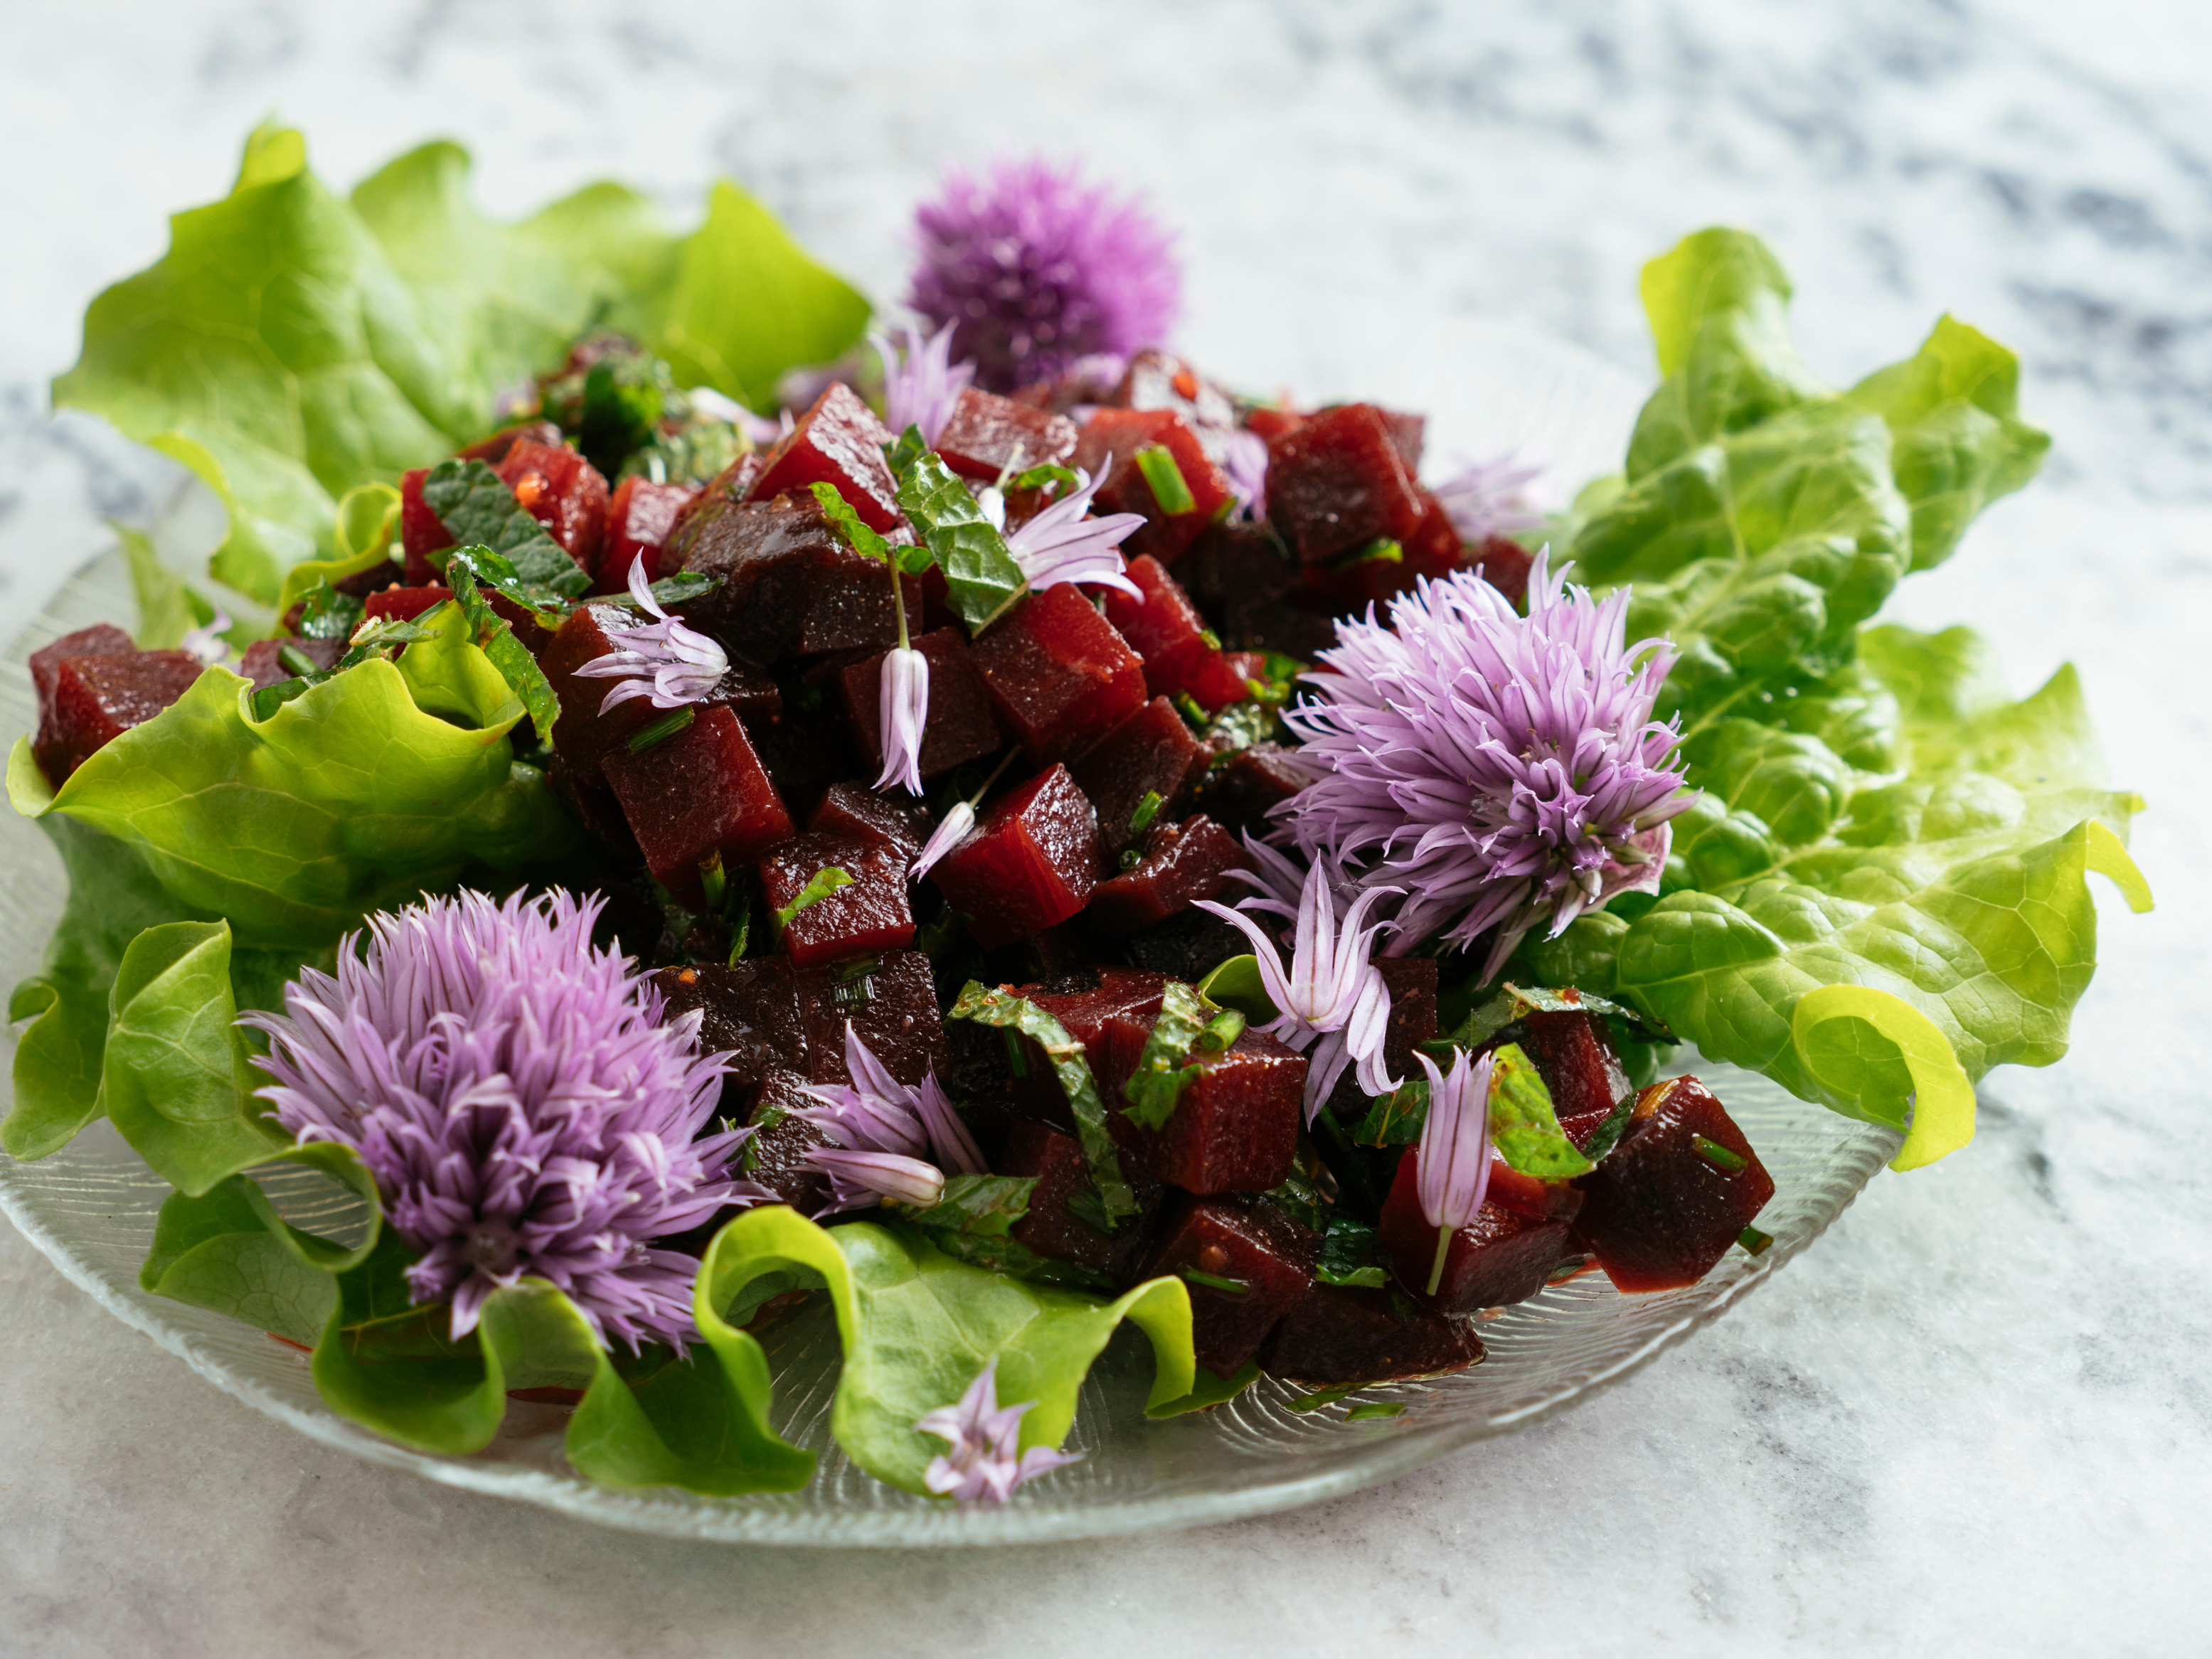 Chive flowers decorate beetroot salad (Alamy/PA)